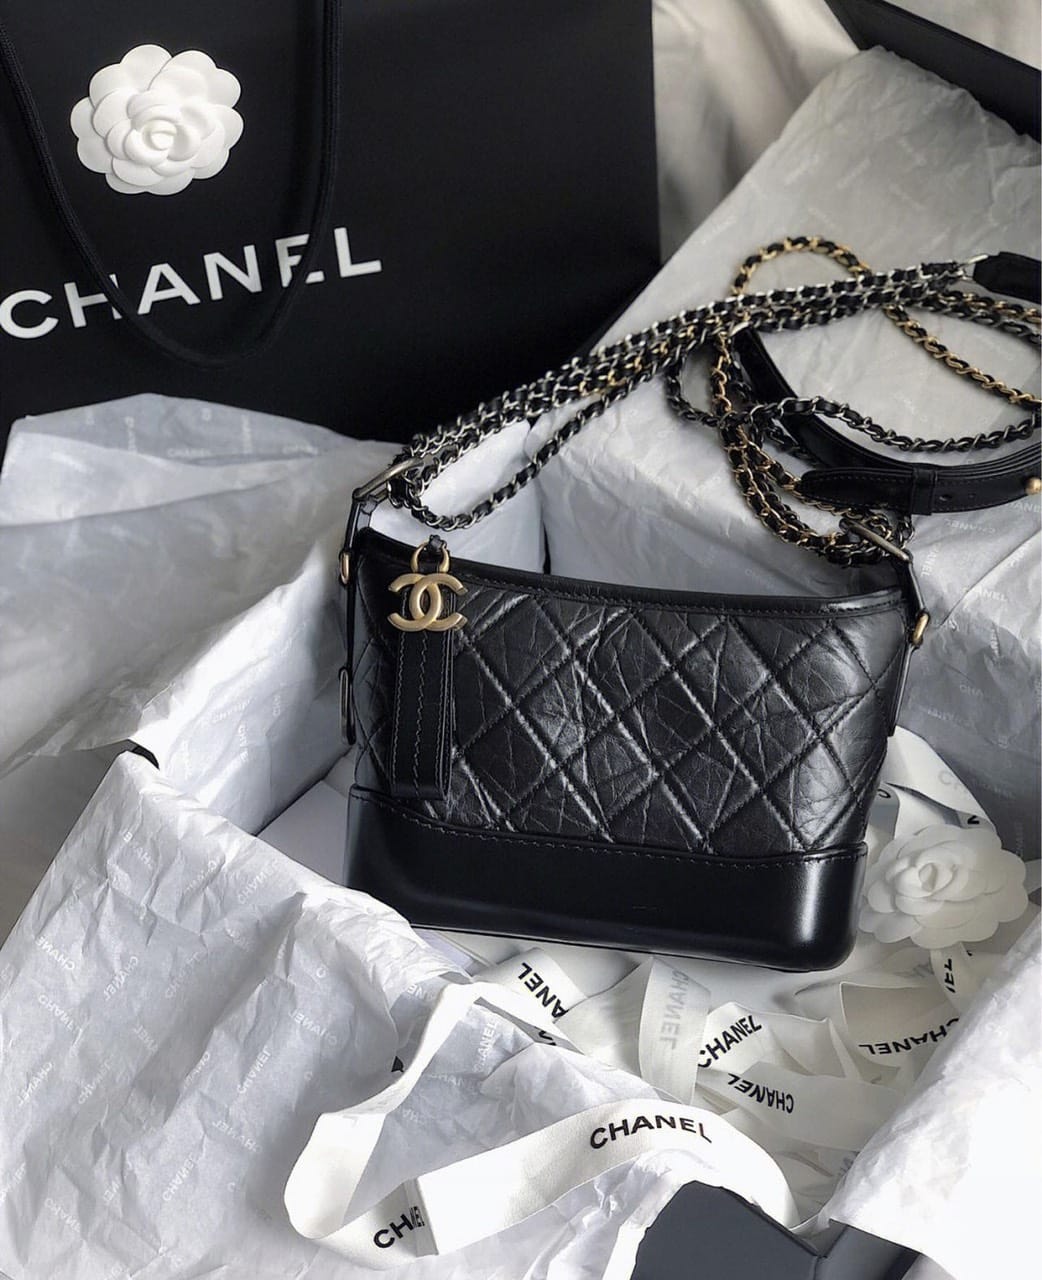 CHANEL GABRIELLE SMALL HOBO BLACK AND WHITE LEATHER BAG